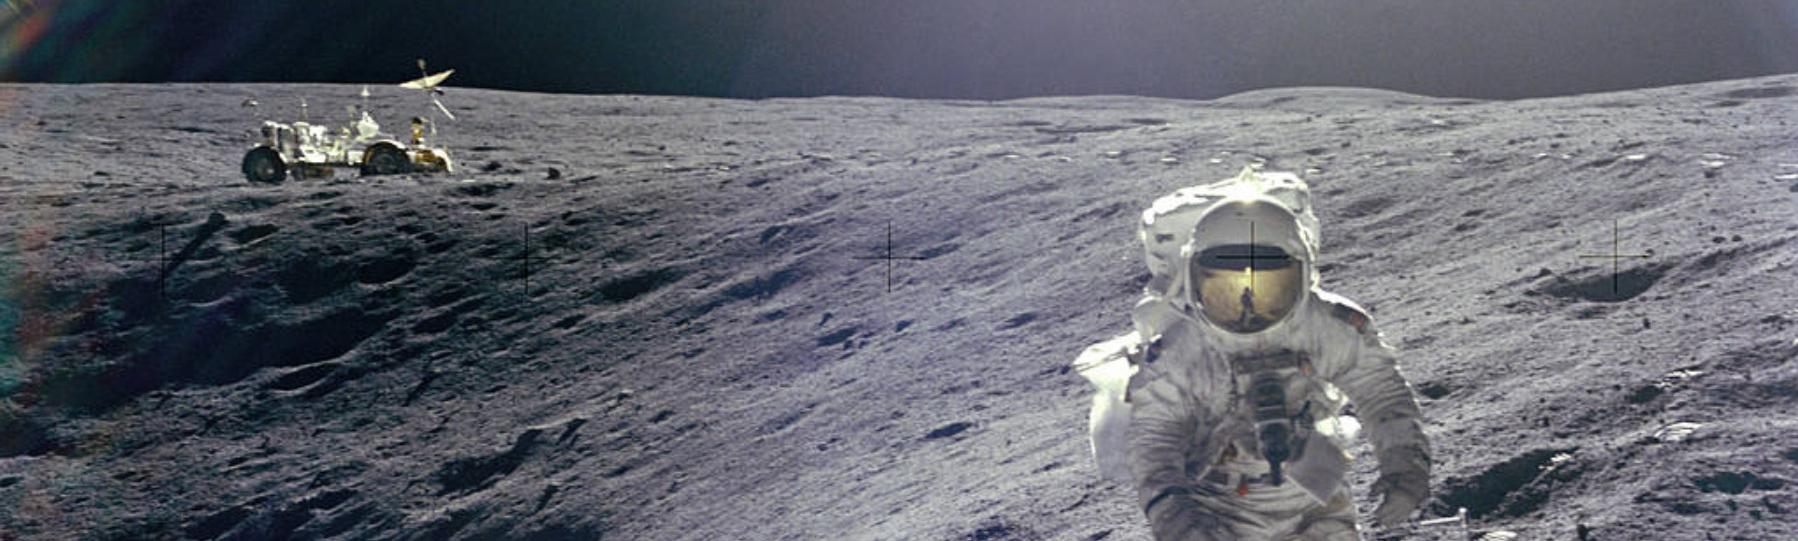 Astronaut Charles Duke stands on the Moon facing the camera next to a crater with the lunar rover at a distance in the background.